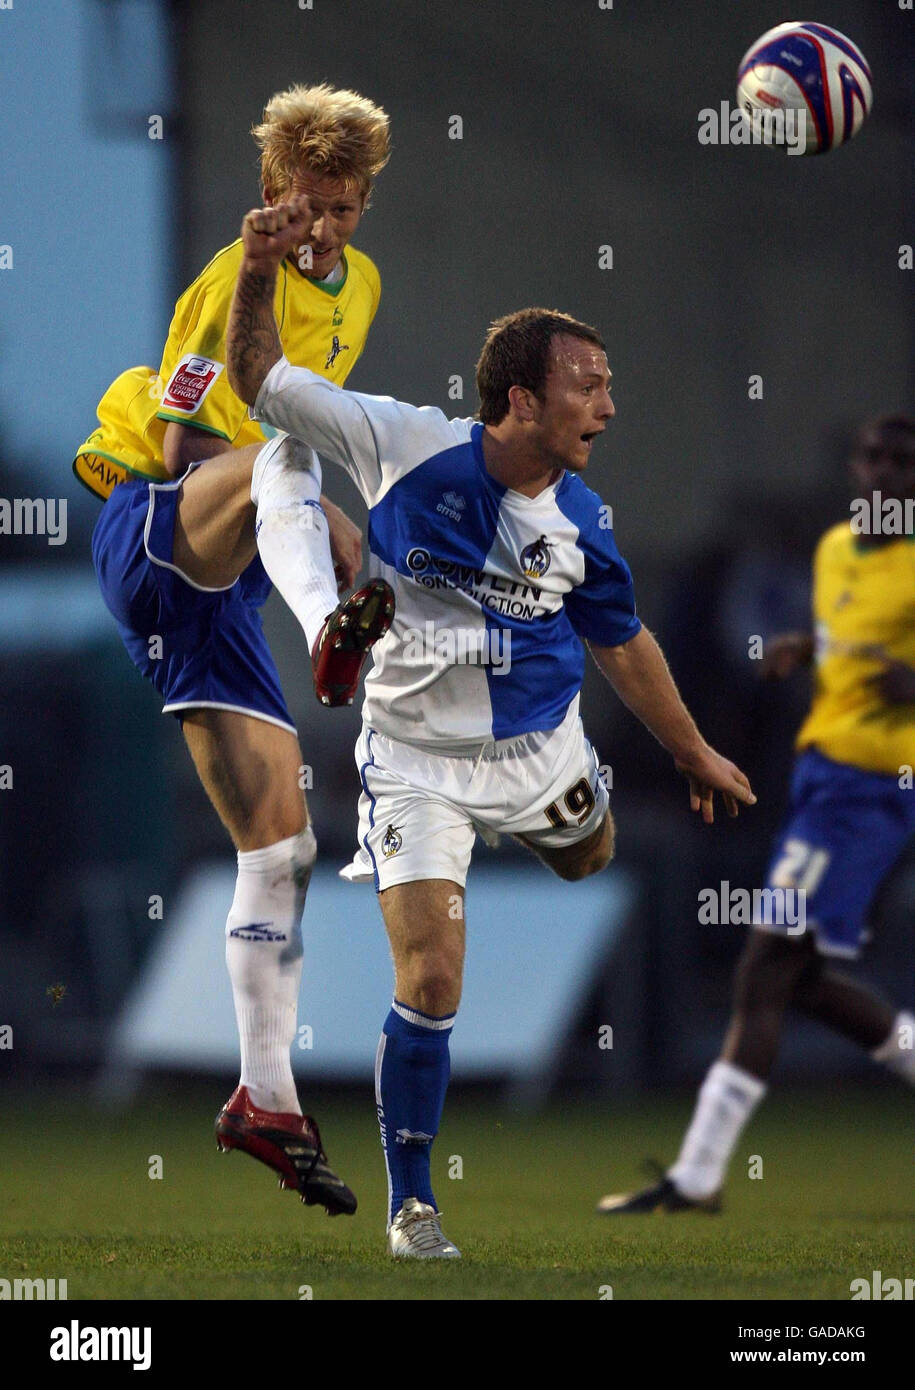 Bristol Rovers' Sean Rigg and Millwall's Marcus Bignot in action during the Coca-Cola Football League One match at the Memorial Stadium, Bristol. Stock Photo